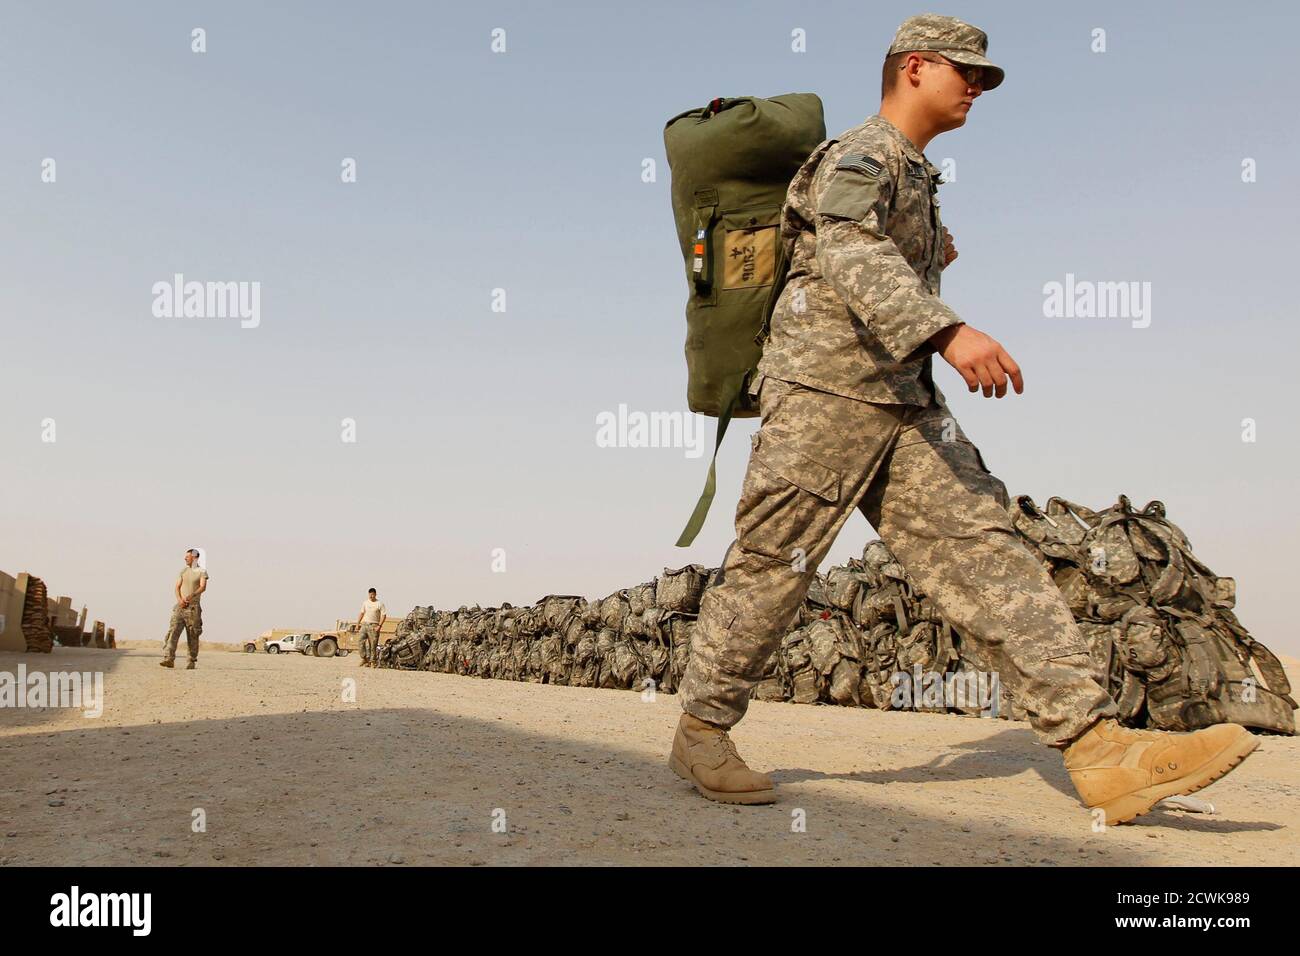 A U.S. soldier from the 1st Battalion,116th Infantry Regiment, carries his bag as he prepares to pull out from Iraq to Kuwait, at Tallil Air Base near Nassiriya, 300 km (185 miles) southeast of Baghdad, August 15, 2010.  Picture taken August 15, 2010.  REUTERS/Thaier al-Sudani (IRAQ - Tags: CONFLICT POLITICS) MILITARY) Stock Photo